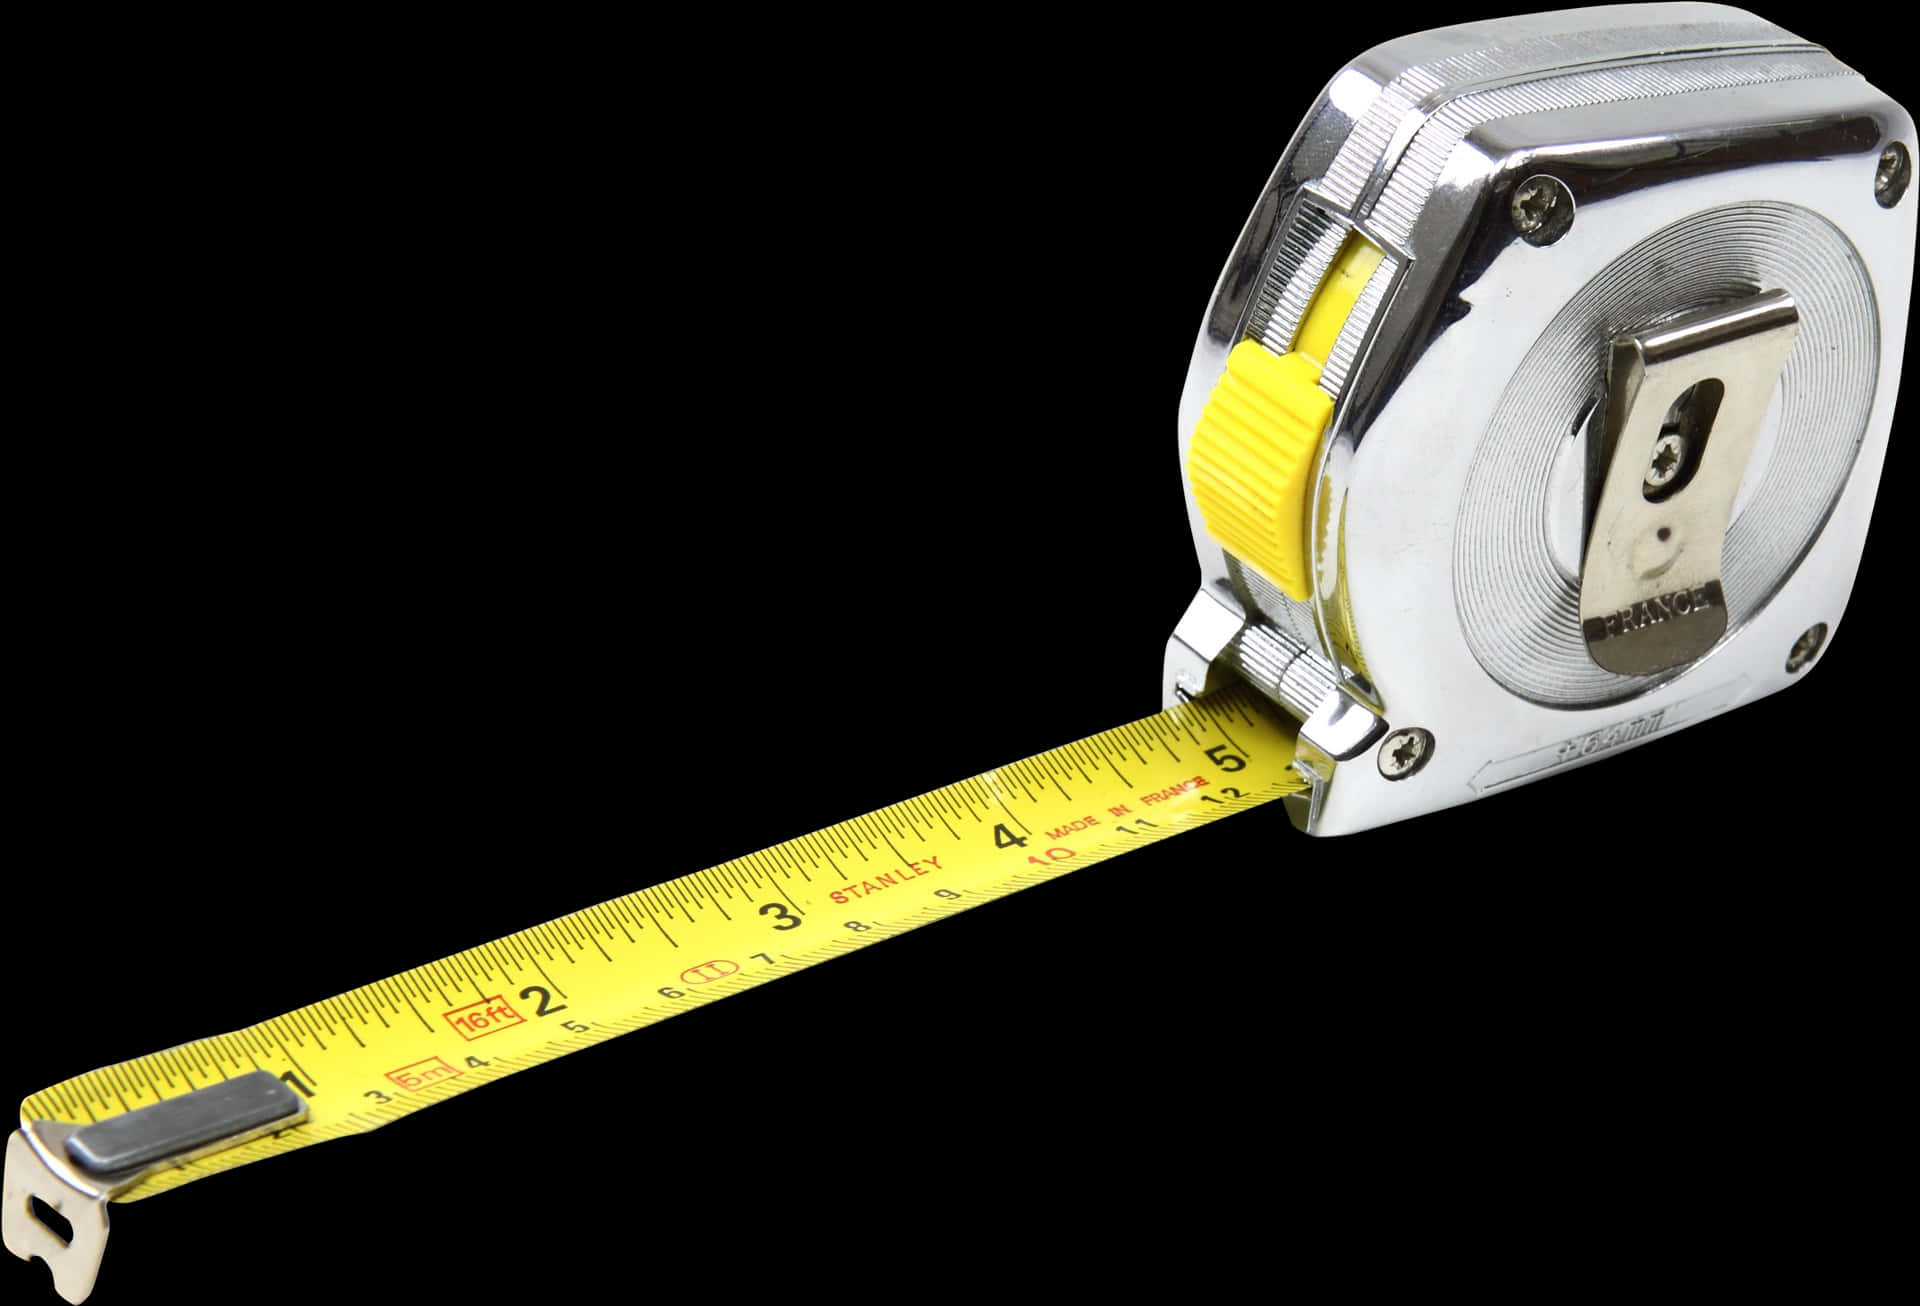 Extended Measuring Tape PNG image